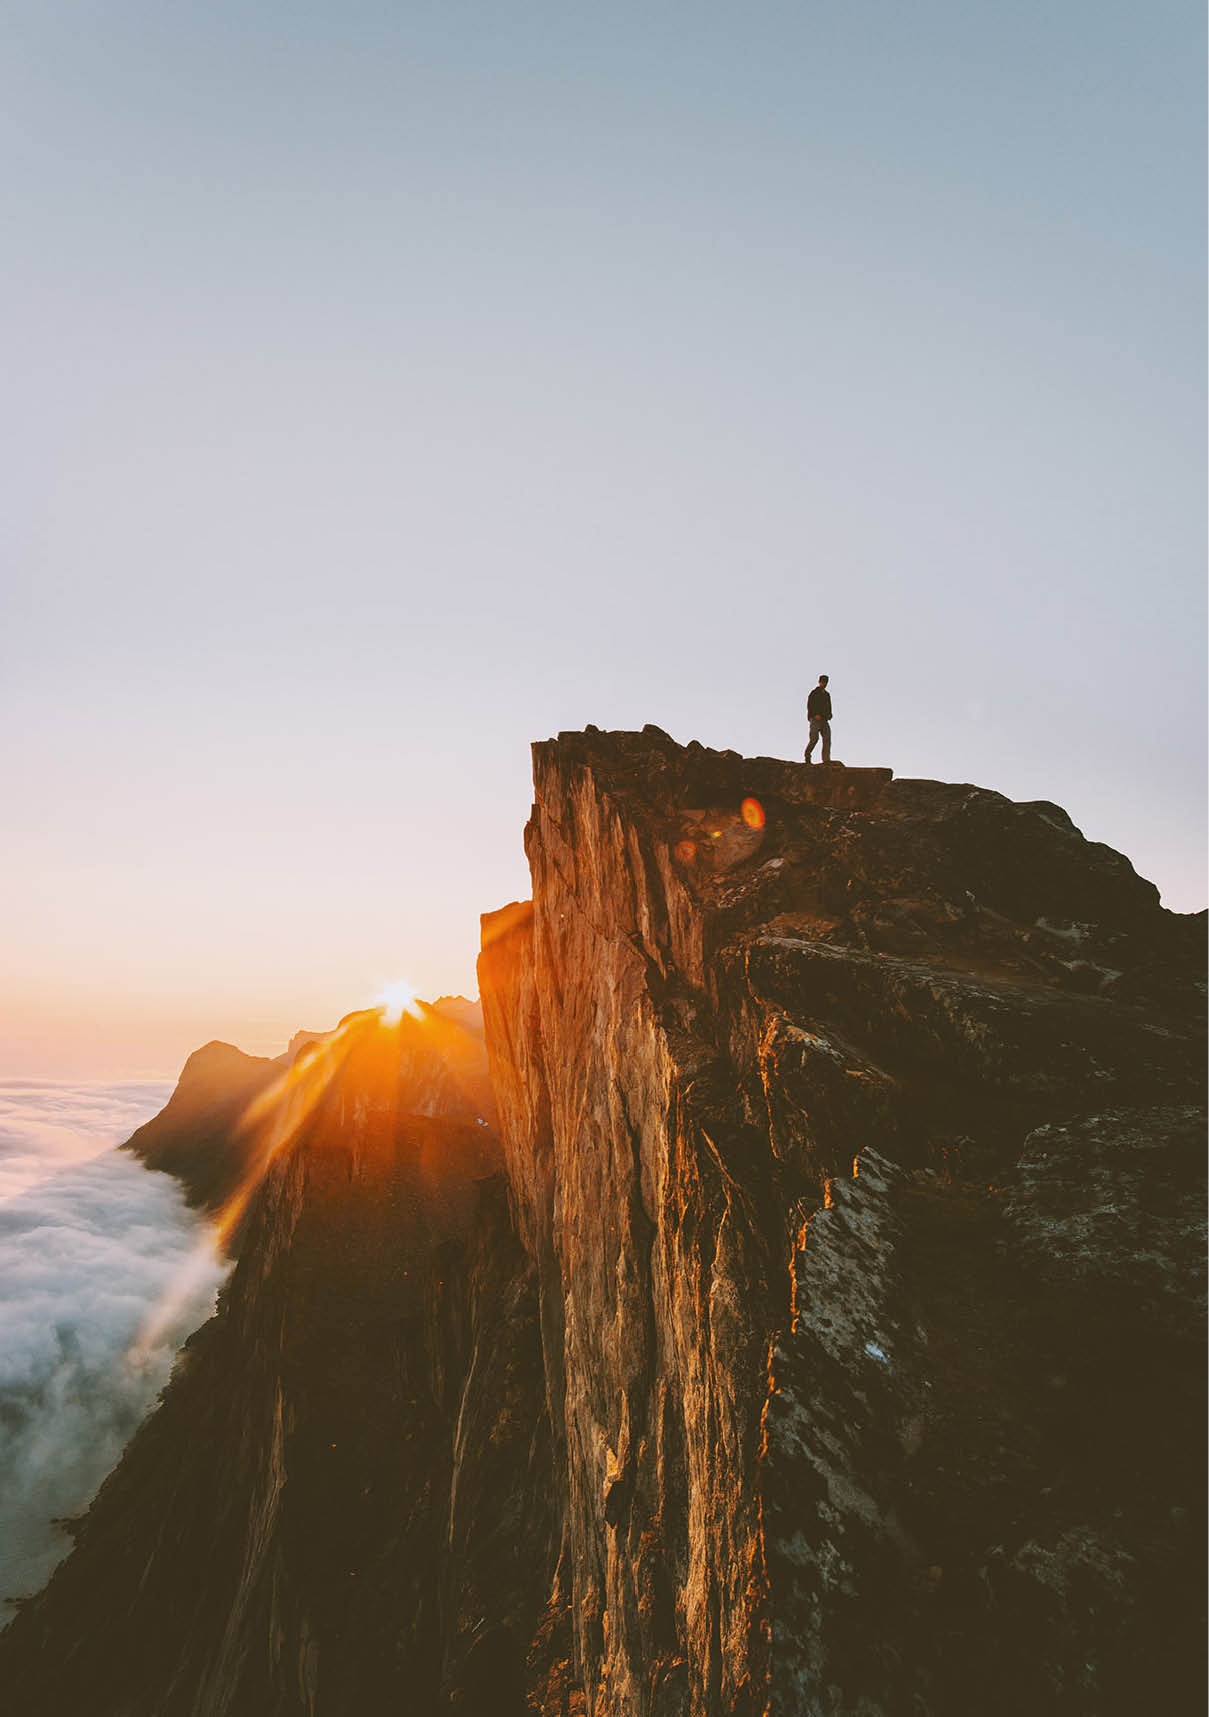 Traveler on cliff hiking alone sunset mountain adventure outdoor active vacations traveling lifestyle getaway